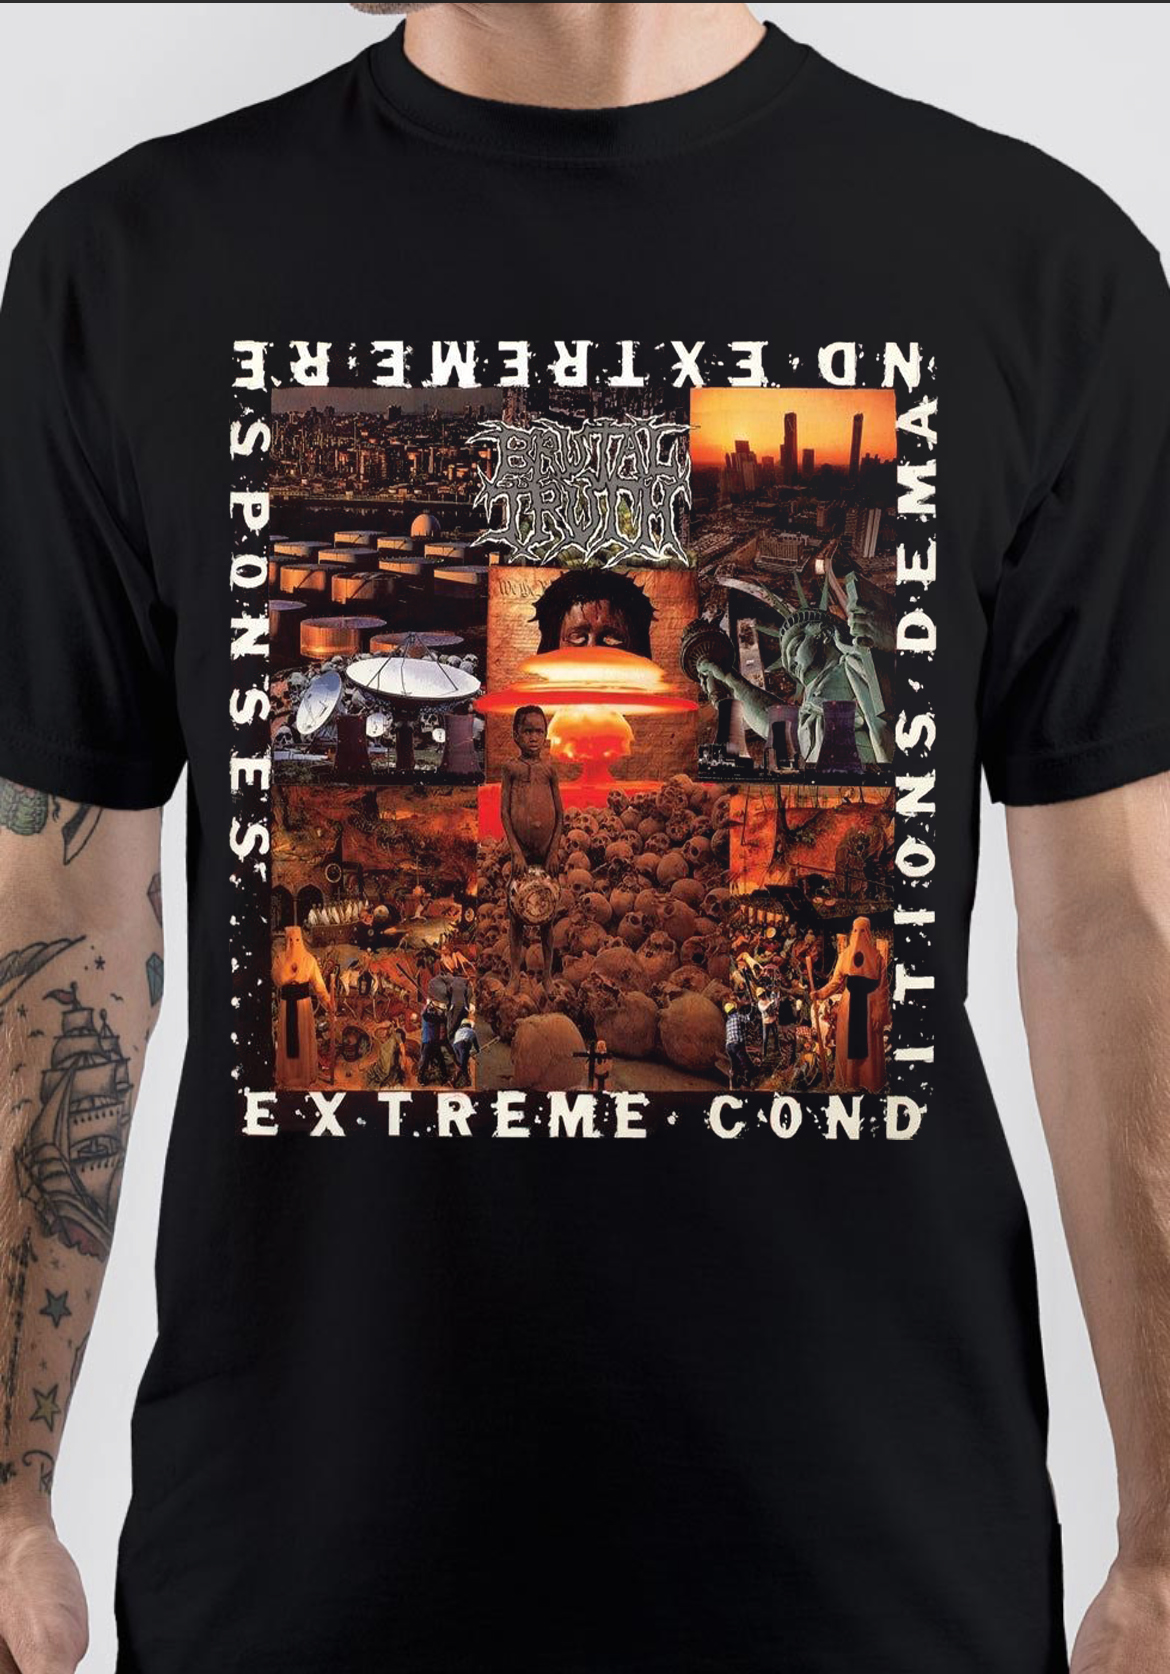 Brutal Truth T-Shirt And Merchandise